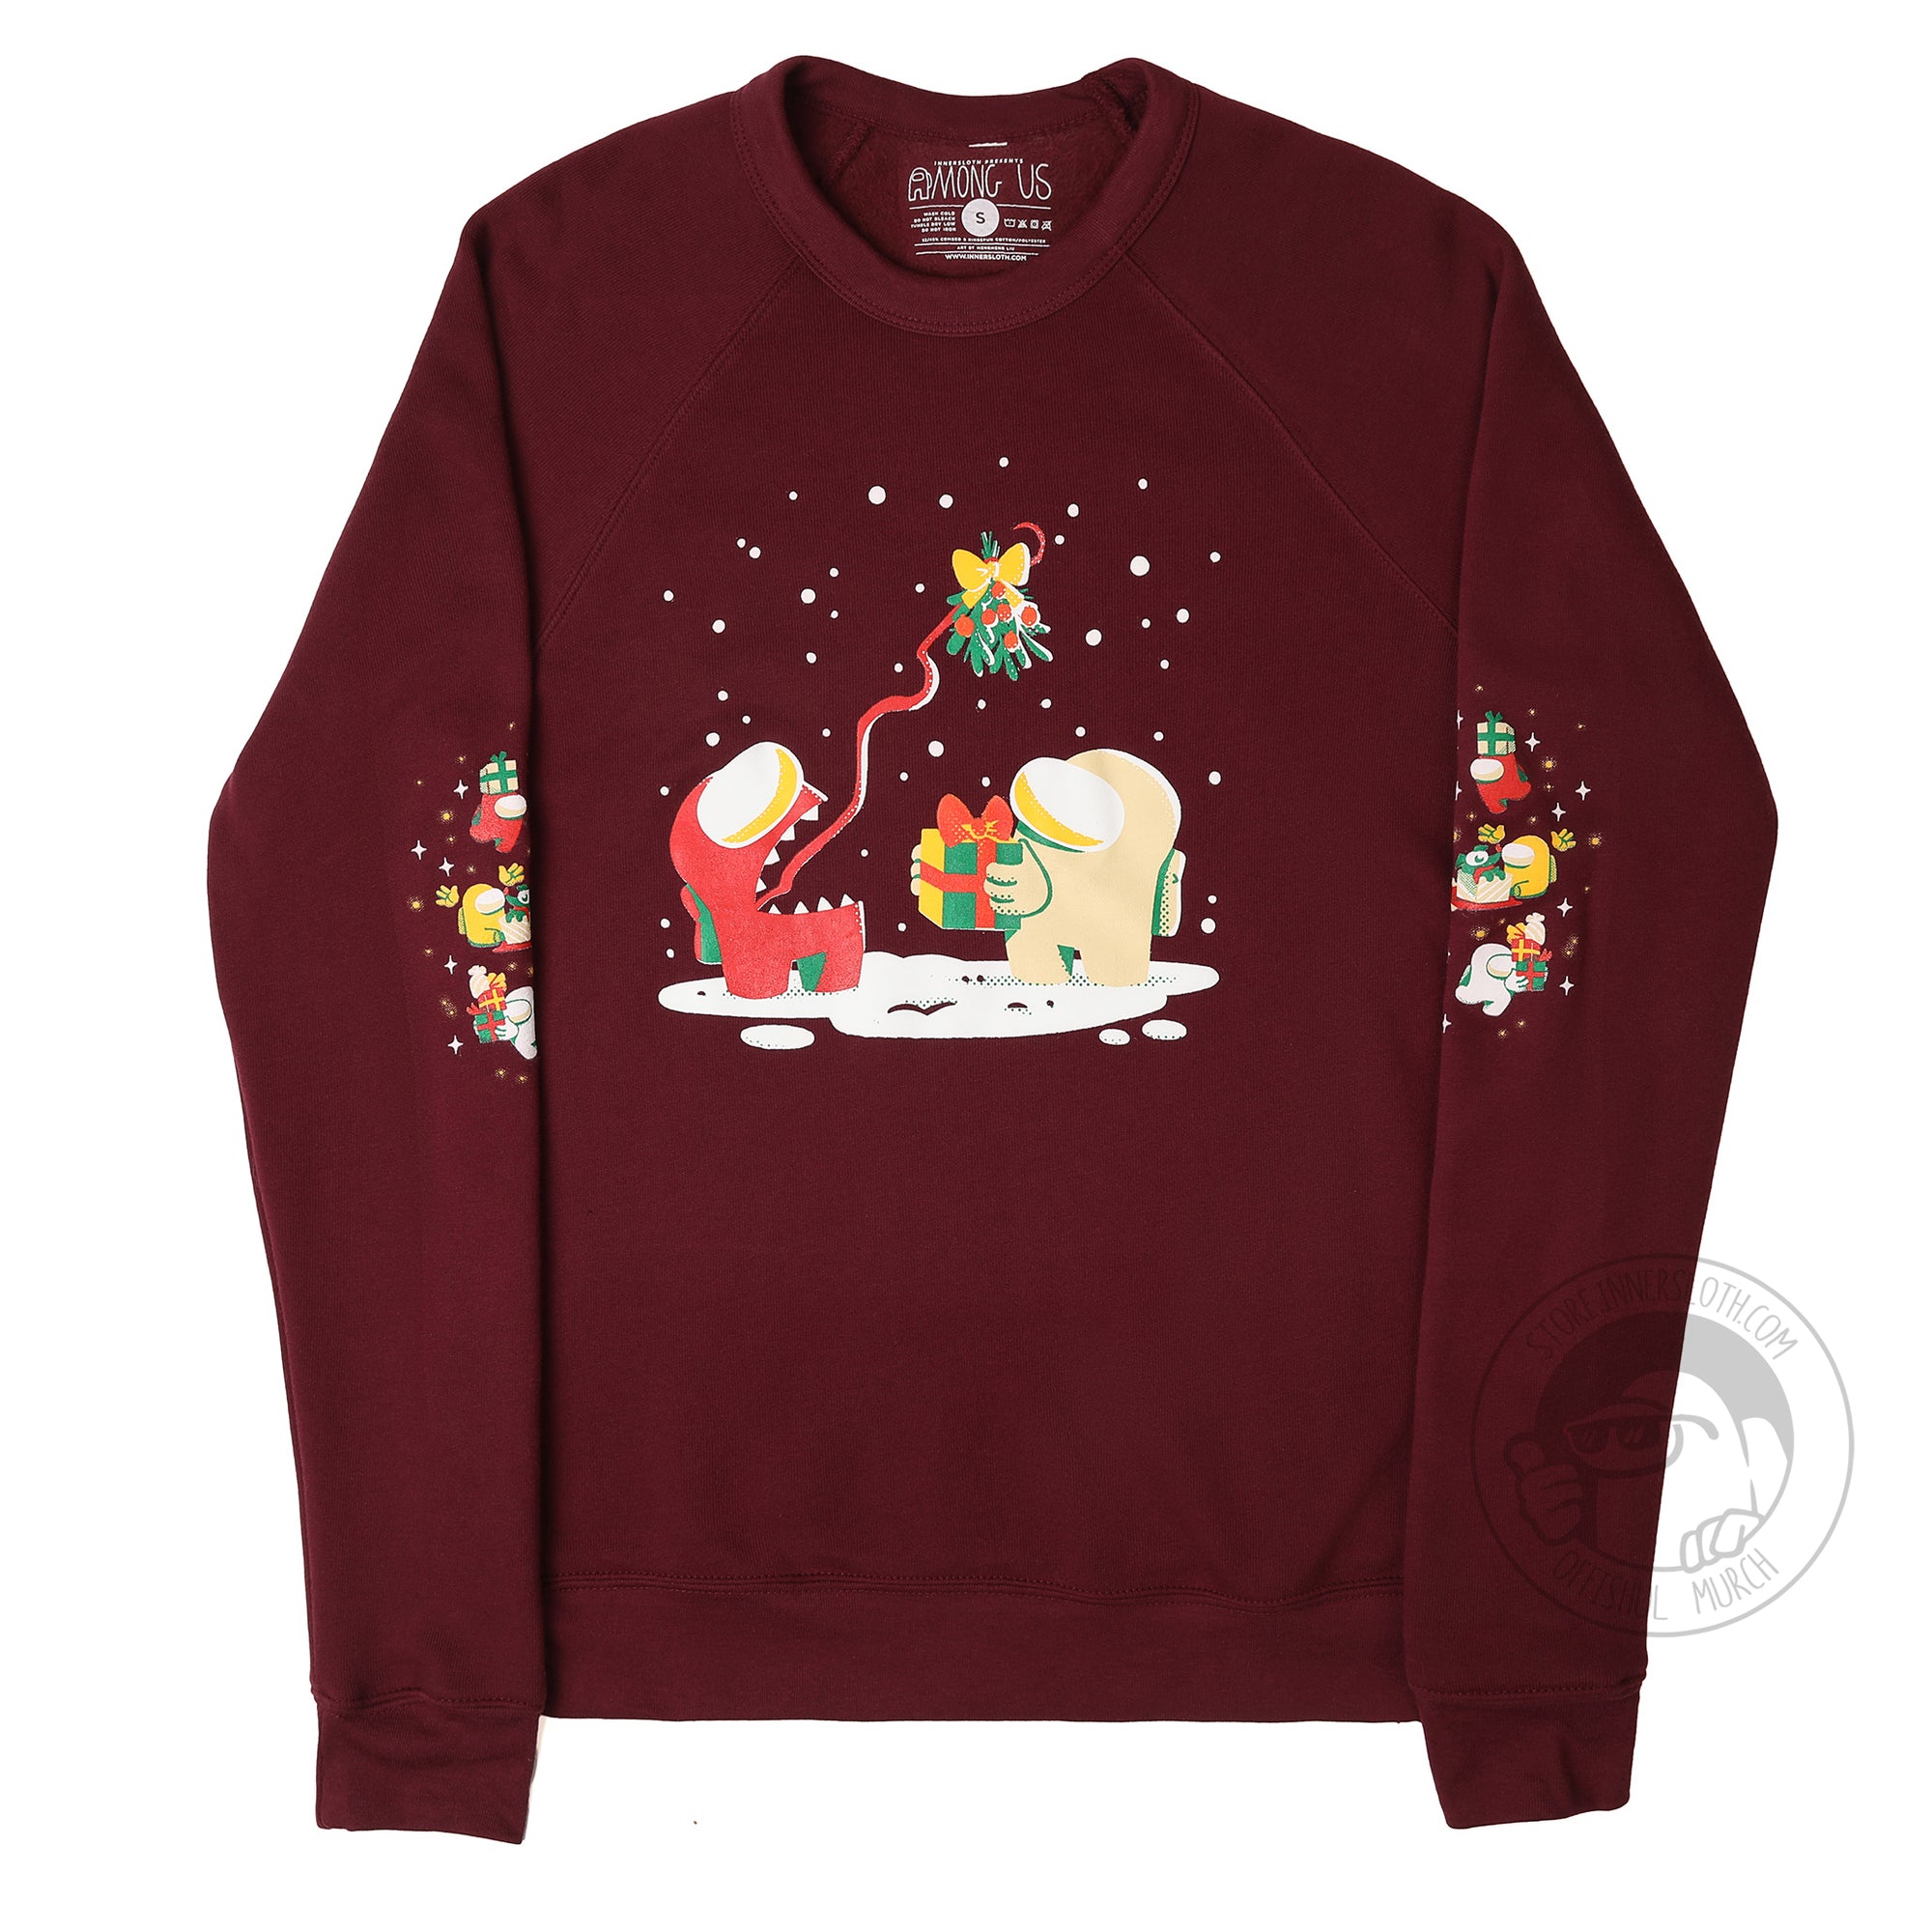 A flat lay photograph of a maroon longsleeve sweatshirt on a white background. The front of the garment features an illustration of an Impostor and Crewmate under the Mistletoe and two mirrored holiday sleeve designs. Artwork designed by Mengmeng Liu